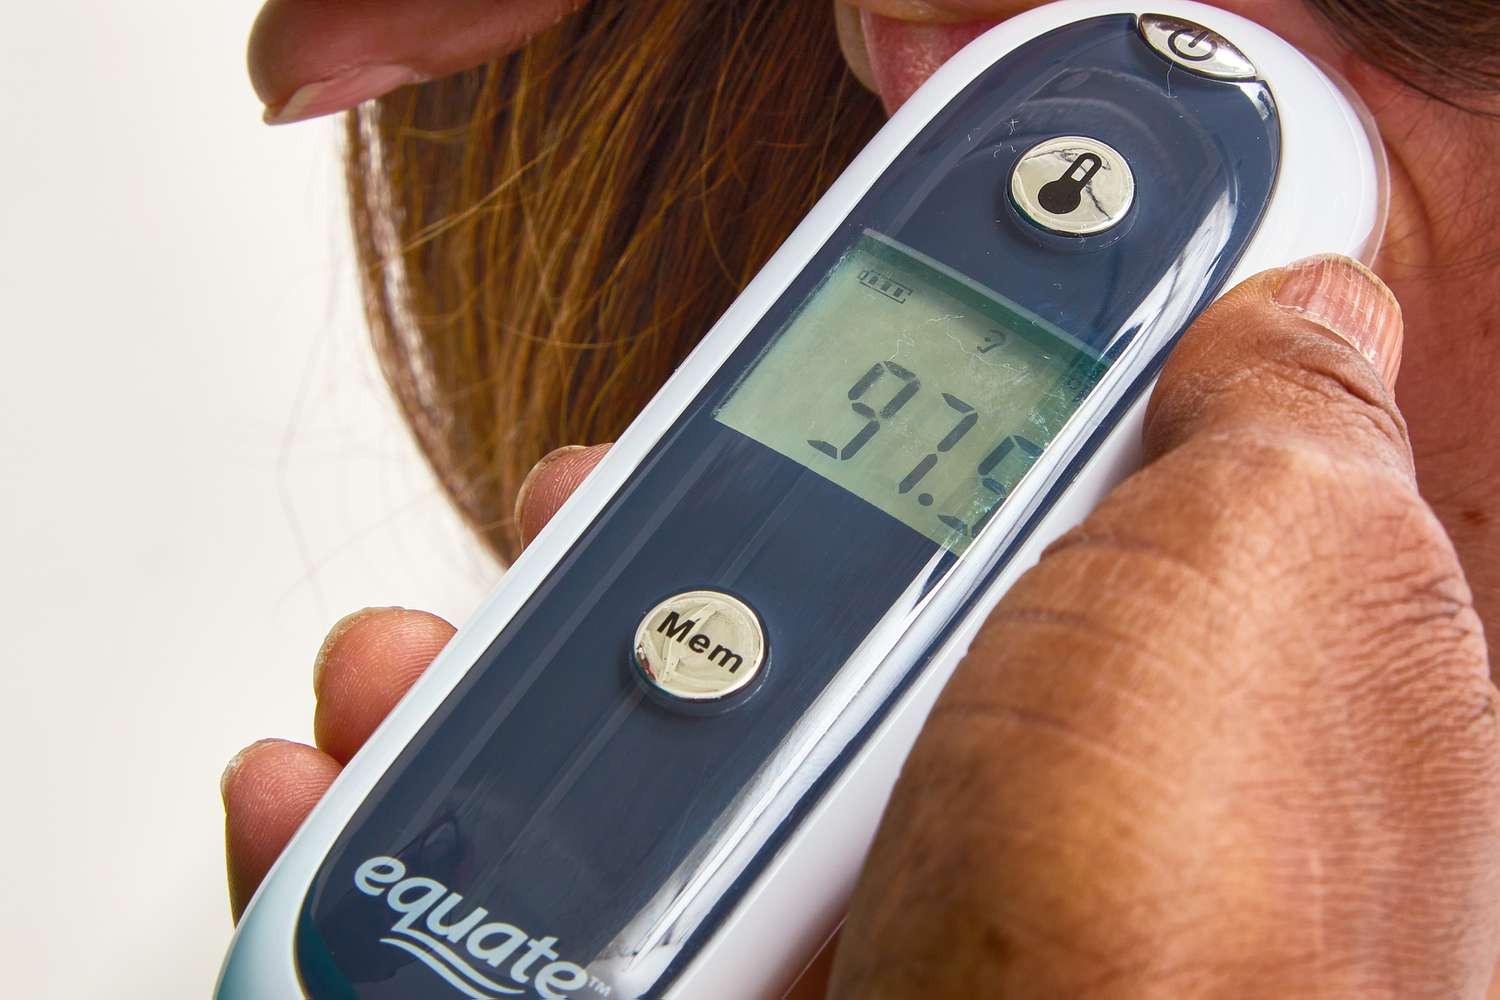 Equate Infrared 1-Second In-Ear Digital Thermometer